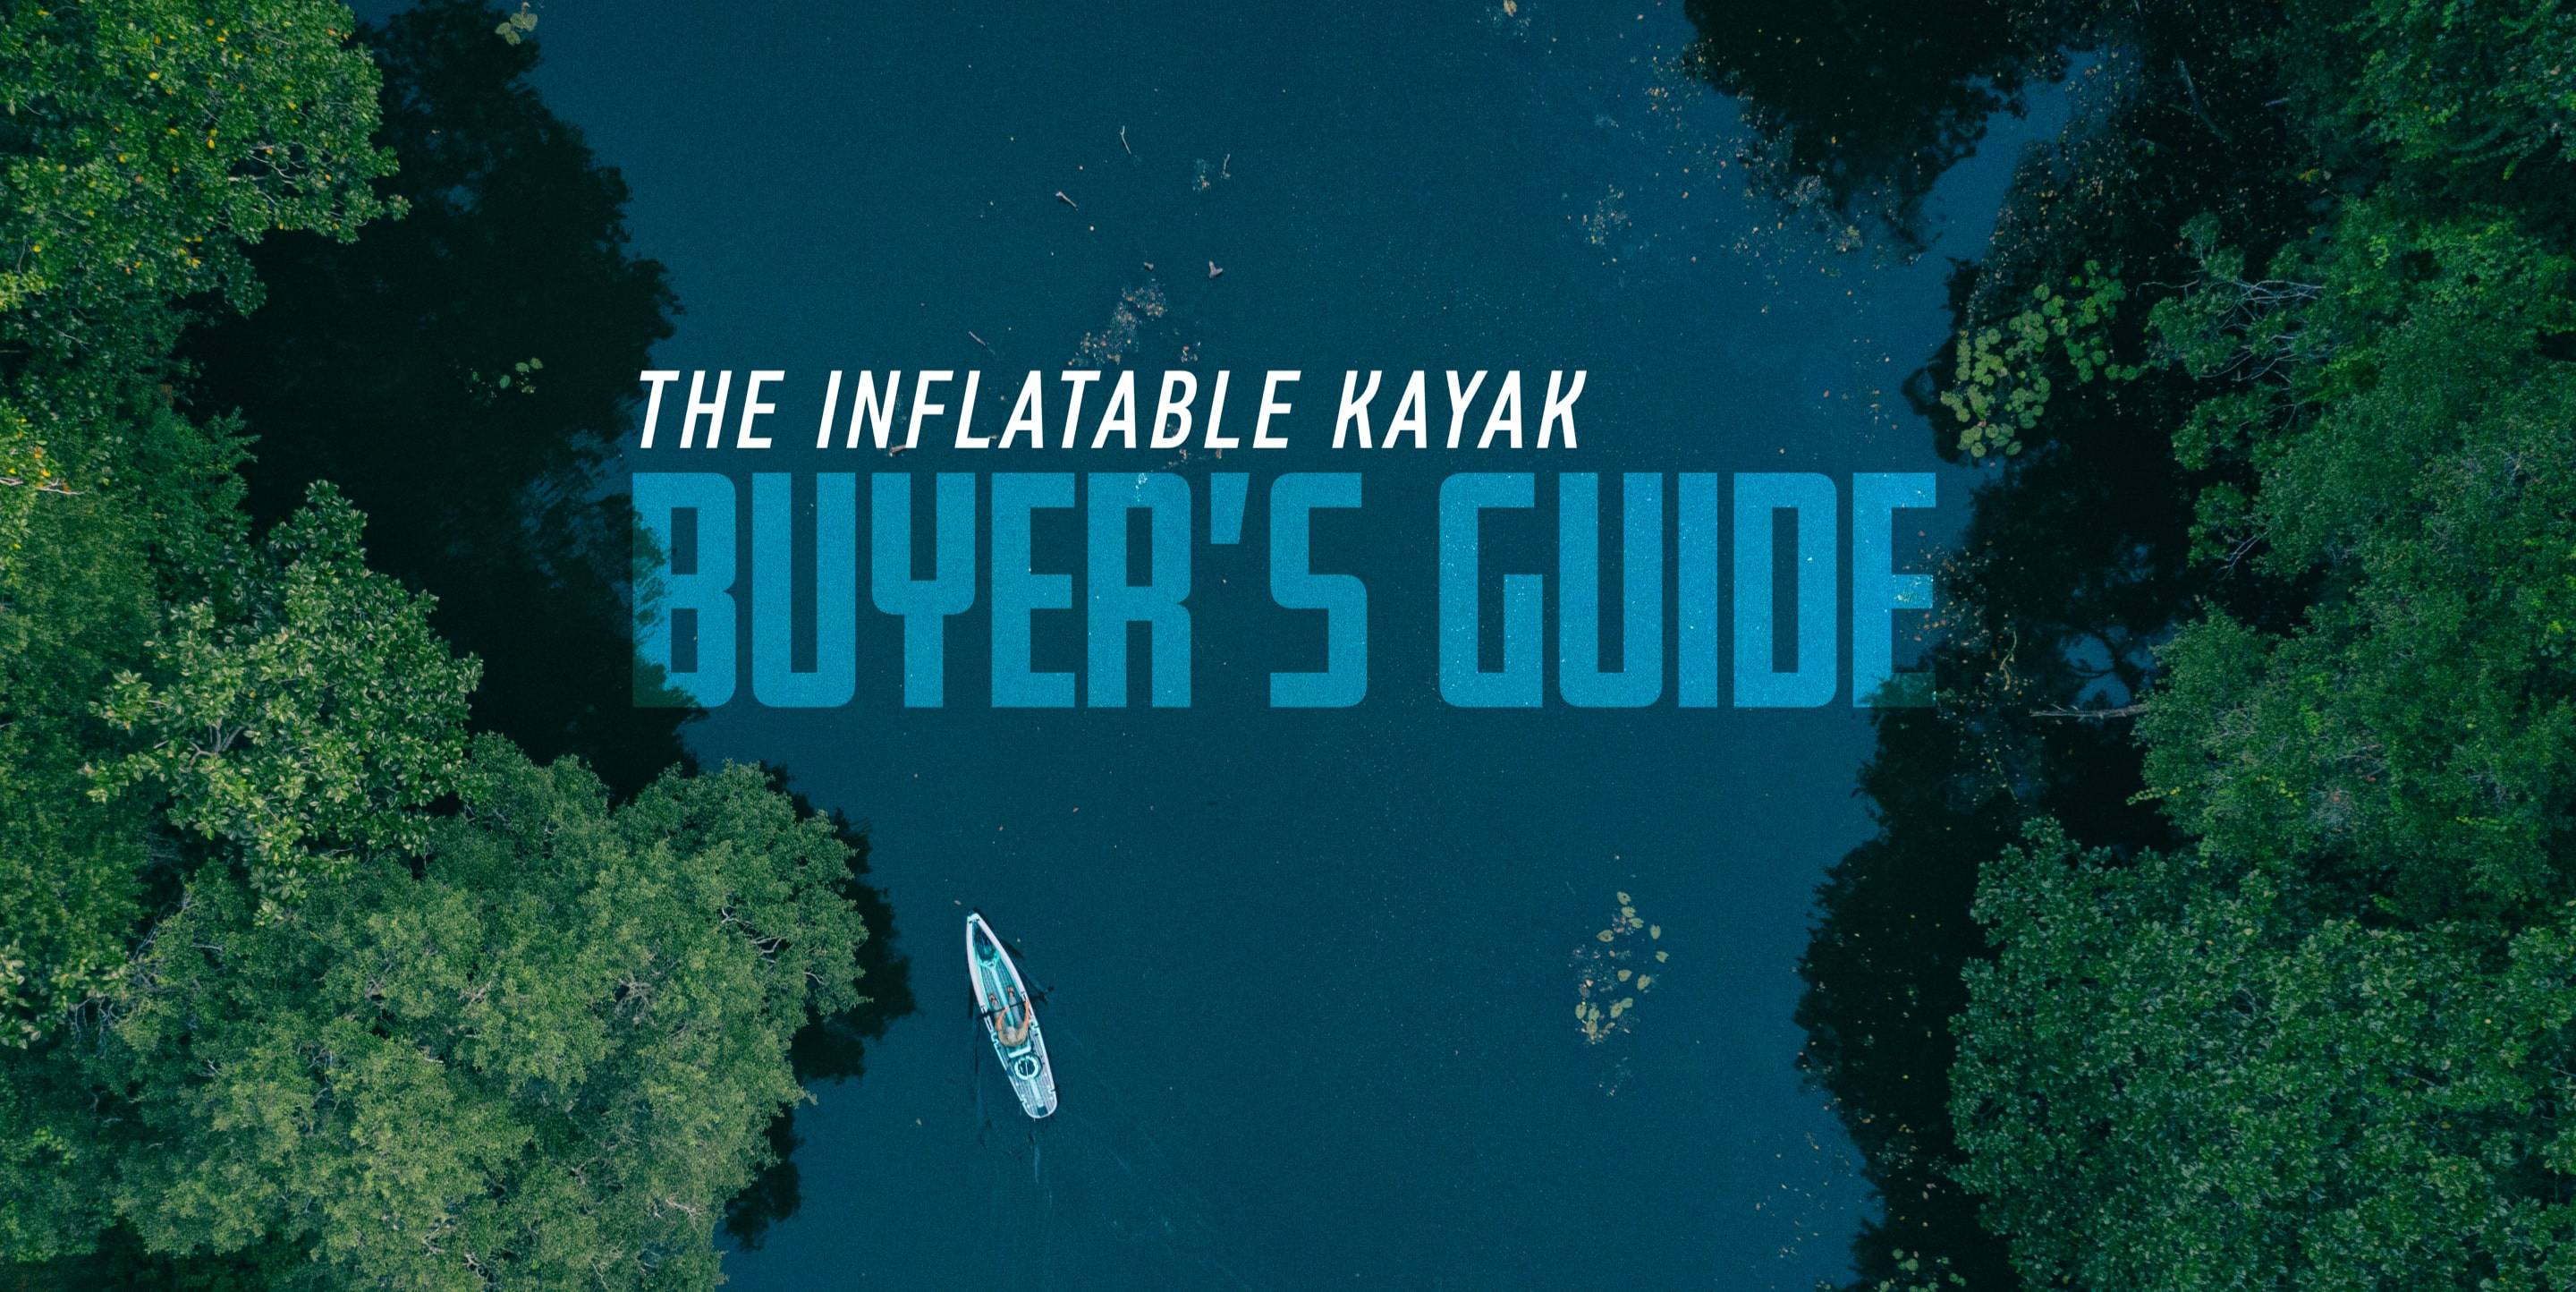 The Inflatable Kayak Buyer's Guide